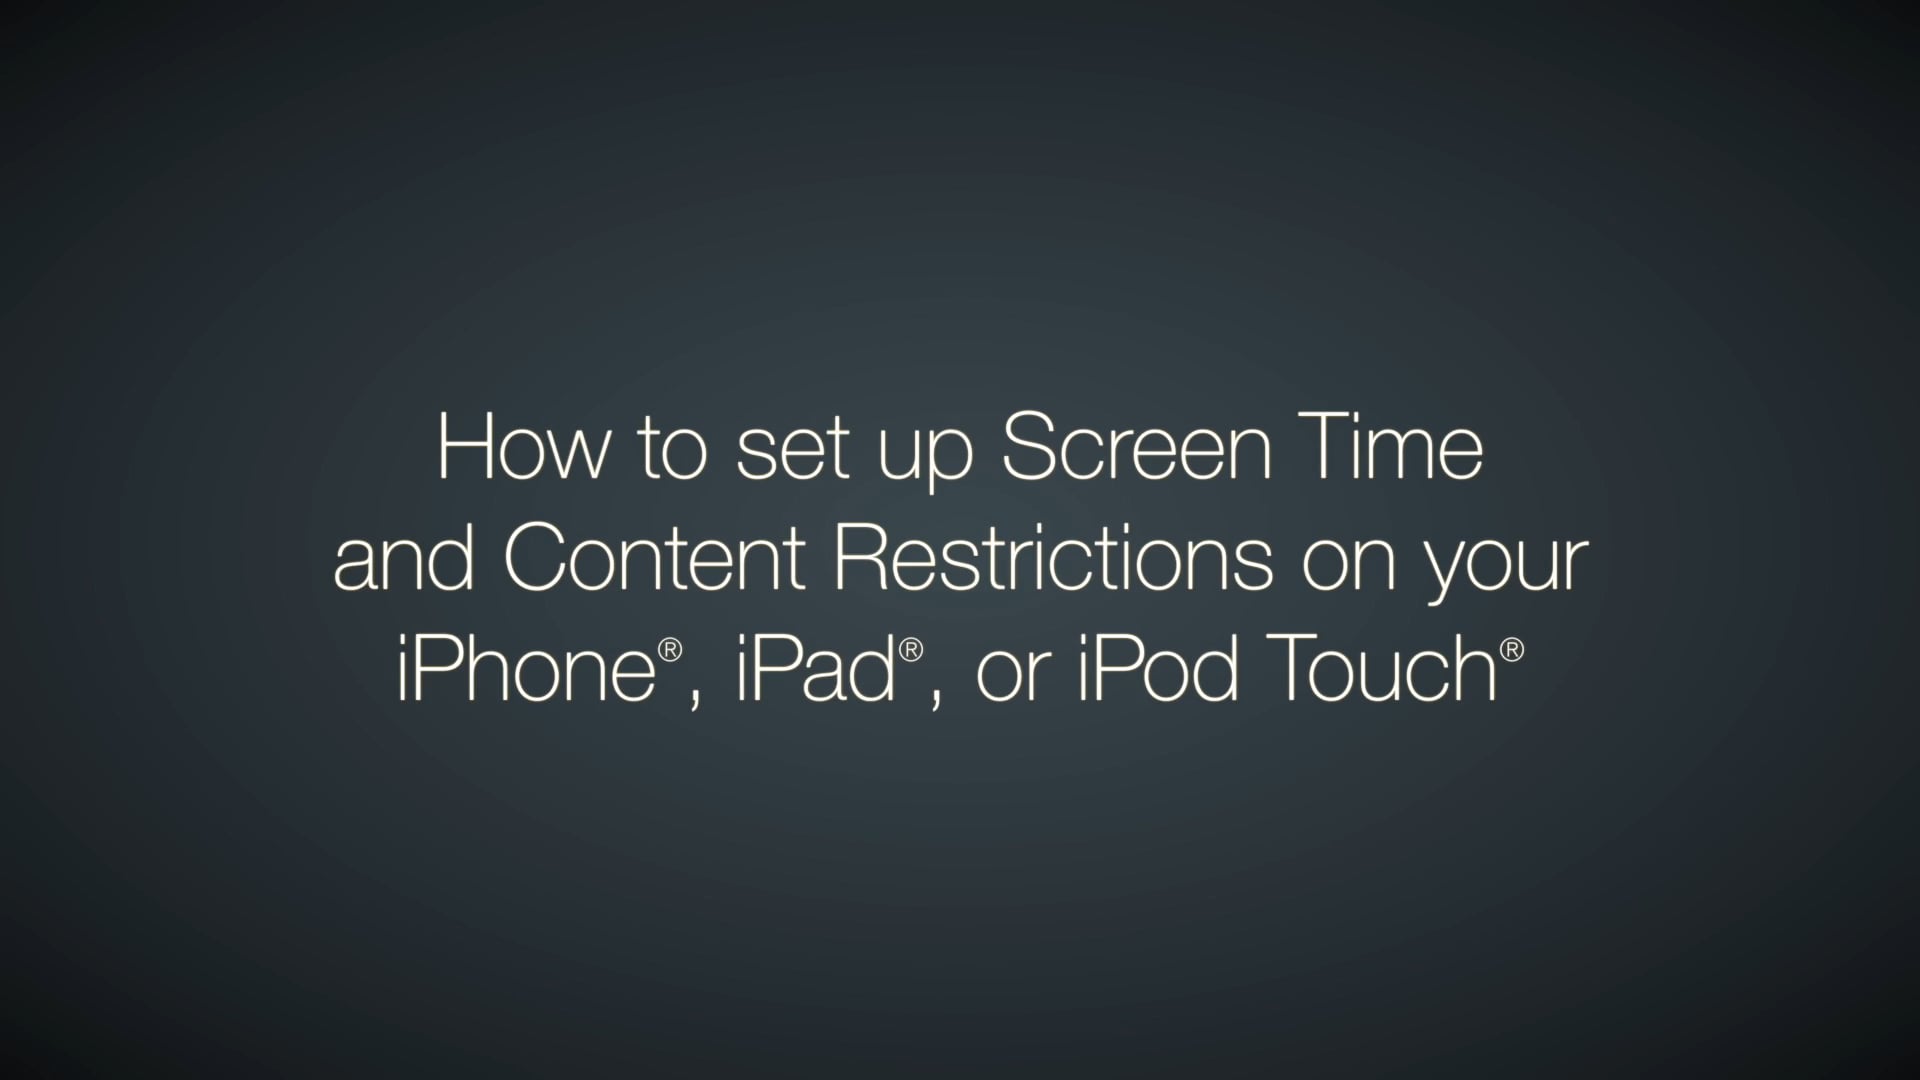 How to Set Up Screen Time and Content Restrictions on Your iOS Devices on Vimeo